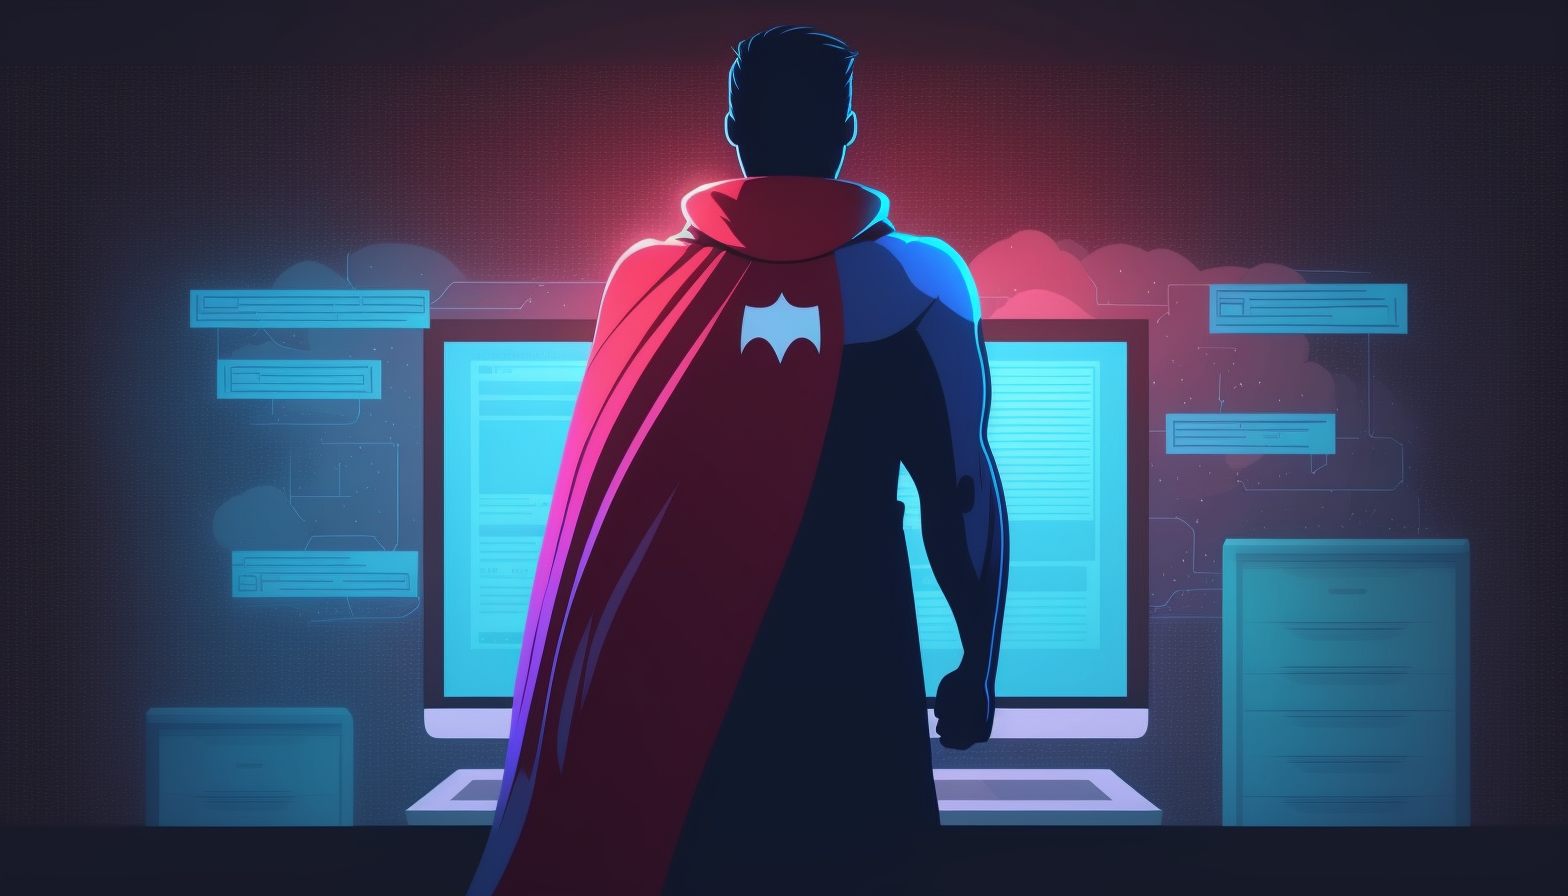 An image of a person standing in front of a computer with a superhero cape on their back, symbolizing the skills and knowledge that can be gained through obtaining cybersecurity certifications.